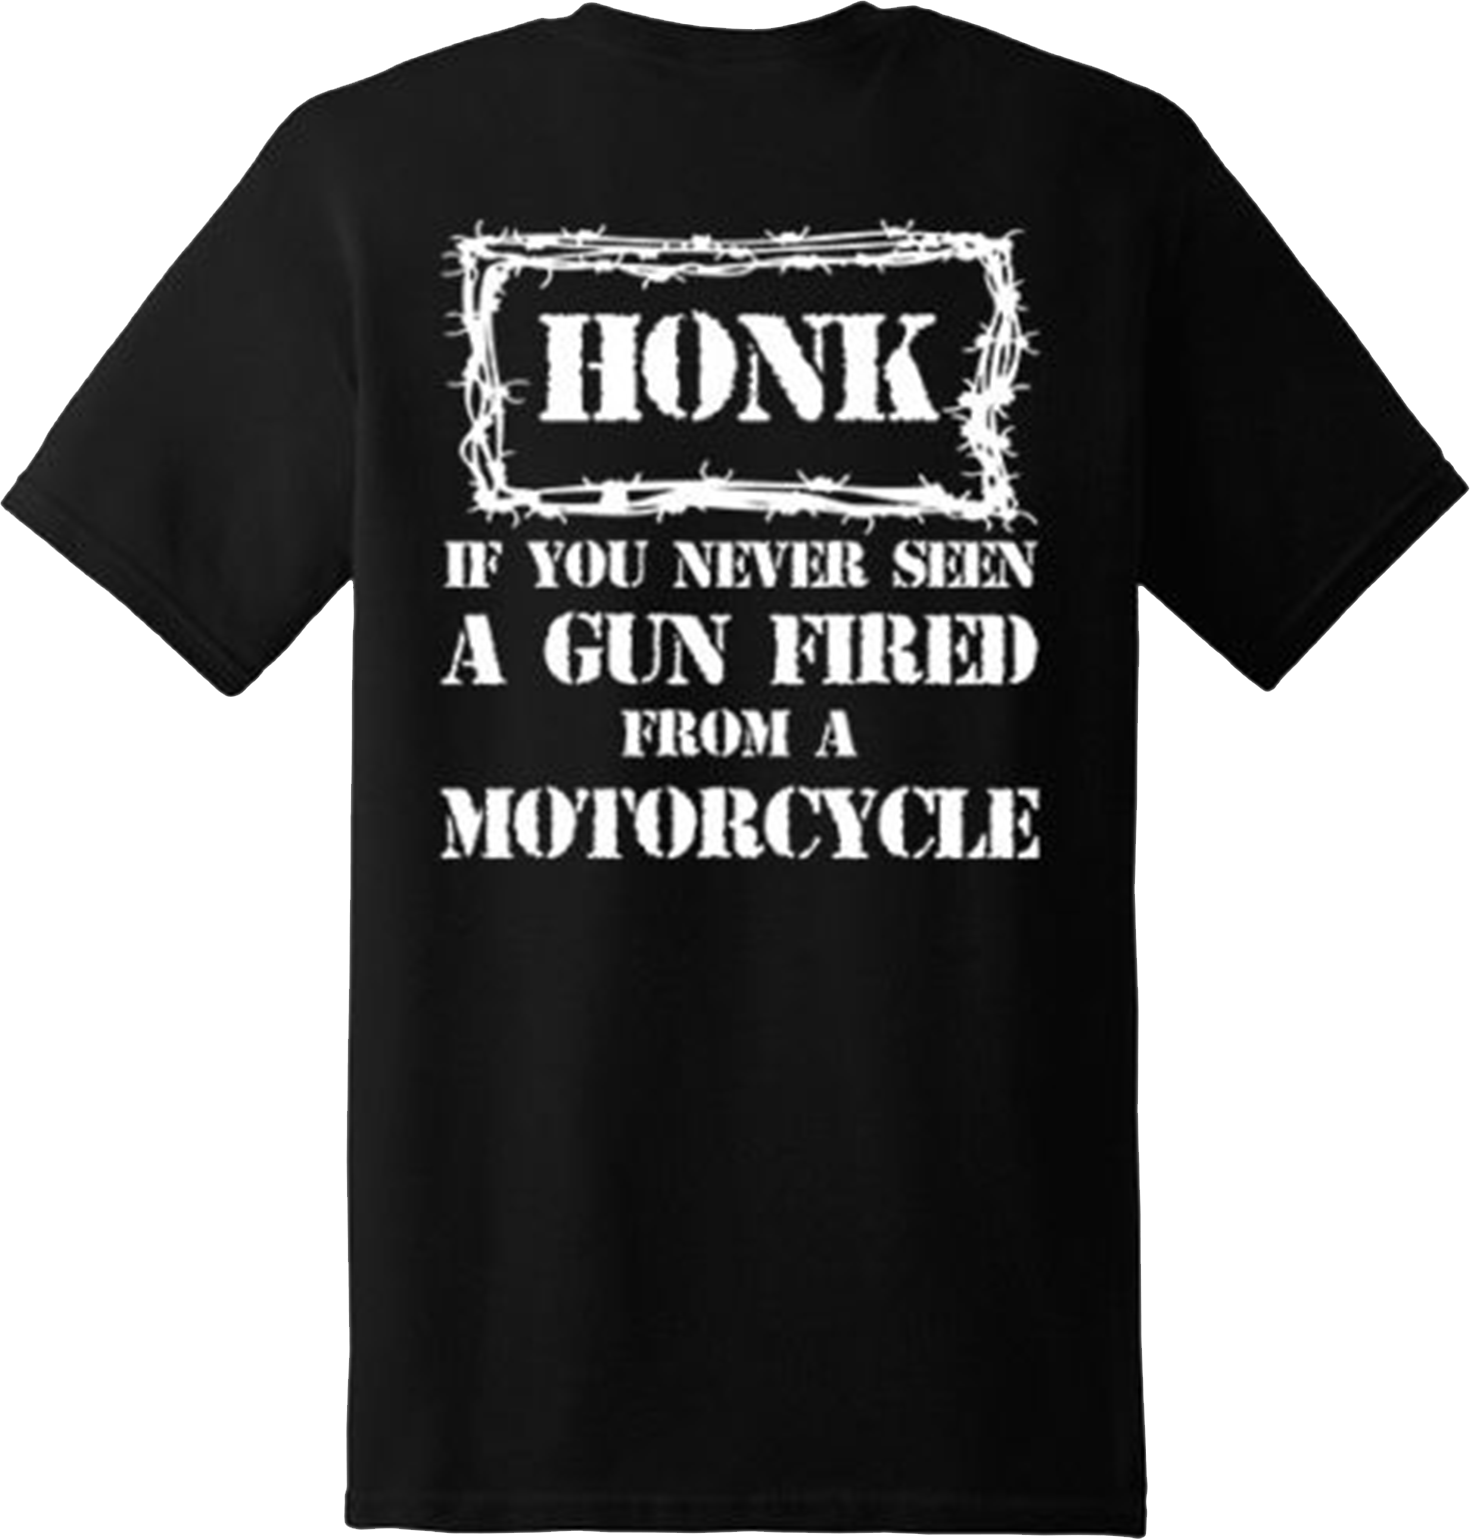 Funny Honk Motorcycle Gun Weapon Offensive Rude Gift T Shirt New Graphic Tee(Back Printed)